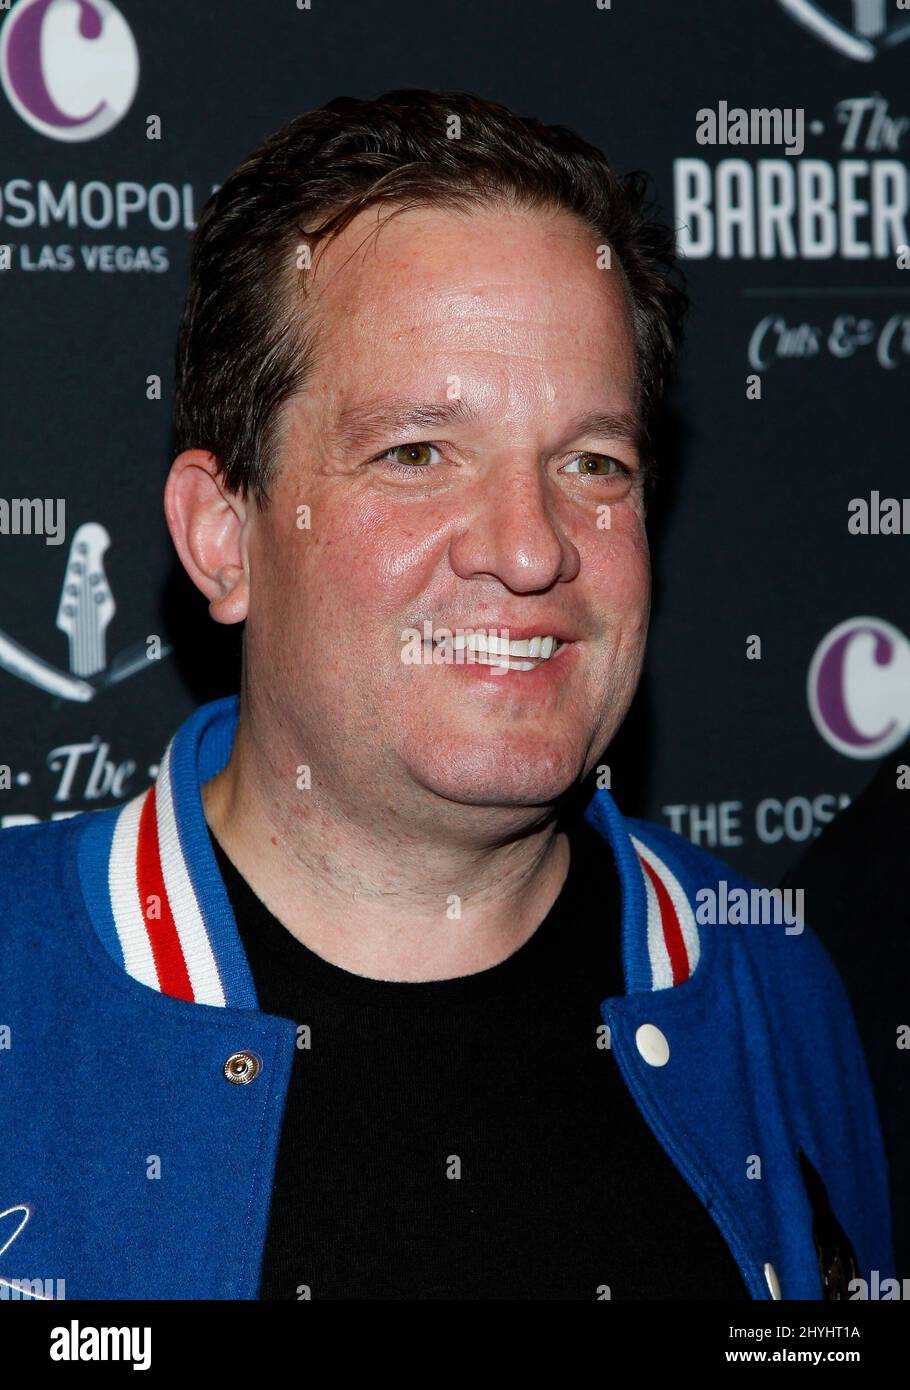 Jeff Beacher at BUSH Kick Off Grand Opening Weekend at The Barbershop Cuts & Cocktails in The Cosmopolitan on March 15, 2019 in Las Vegas, NV. Stock Photo